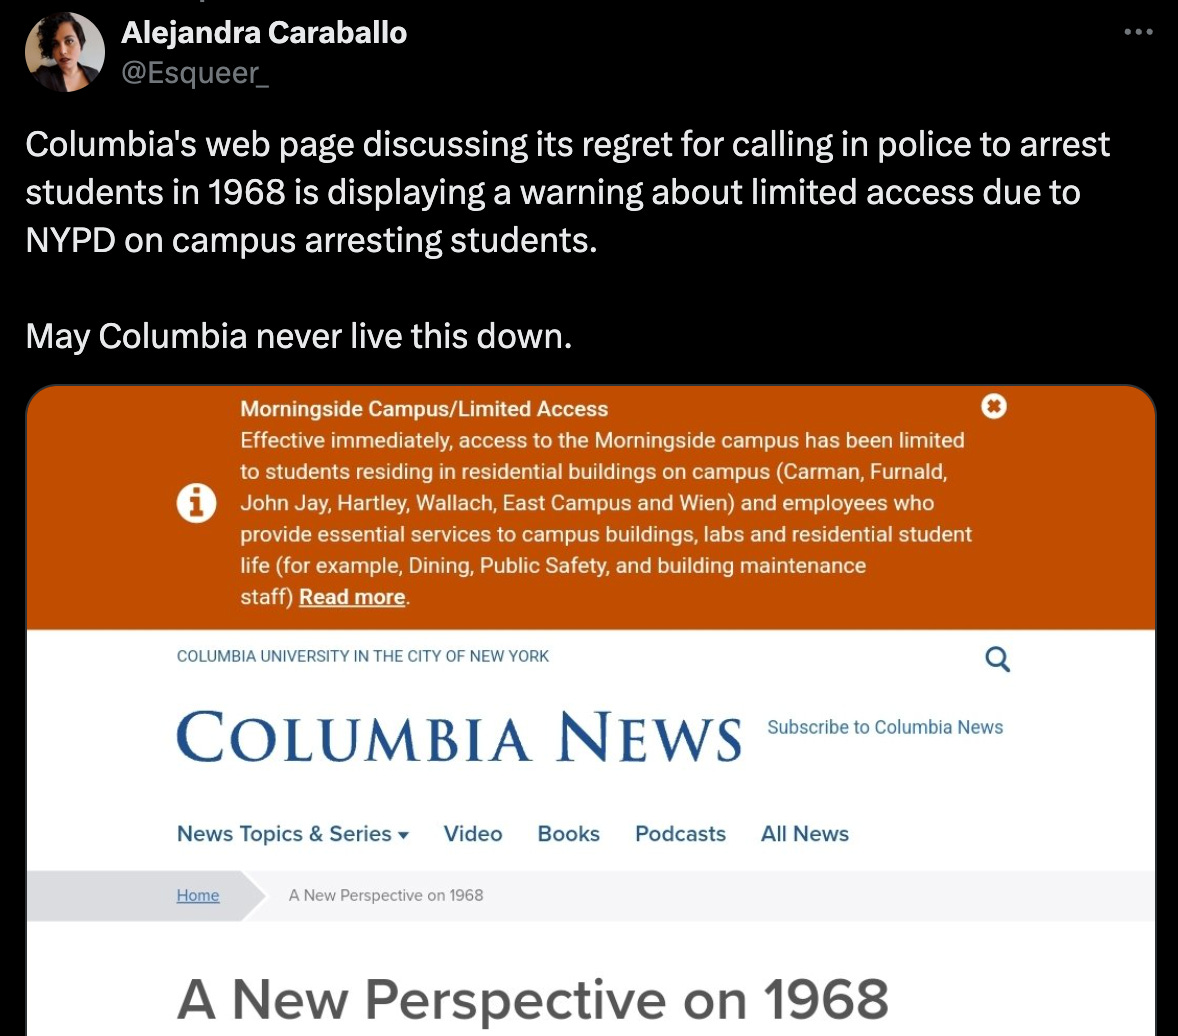 A tweet: "Columbia's web page discussing its regret for calling in police to arrest students in 1968 is displaying a warning about limited access due to NYPD on campus arresting students.  May Columbia never live this down."